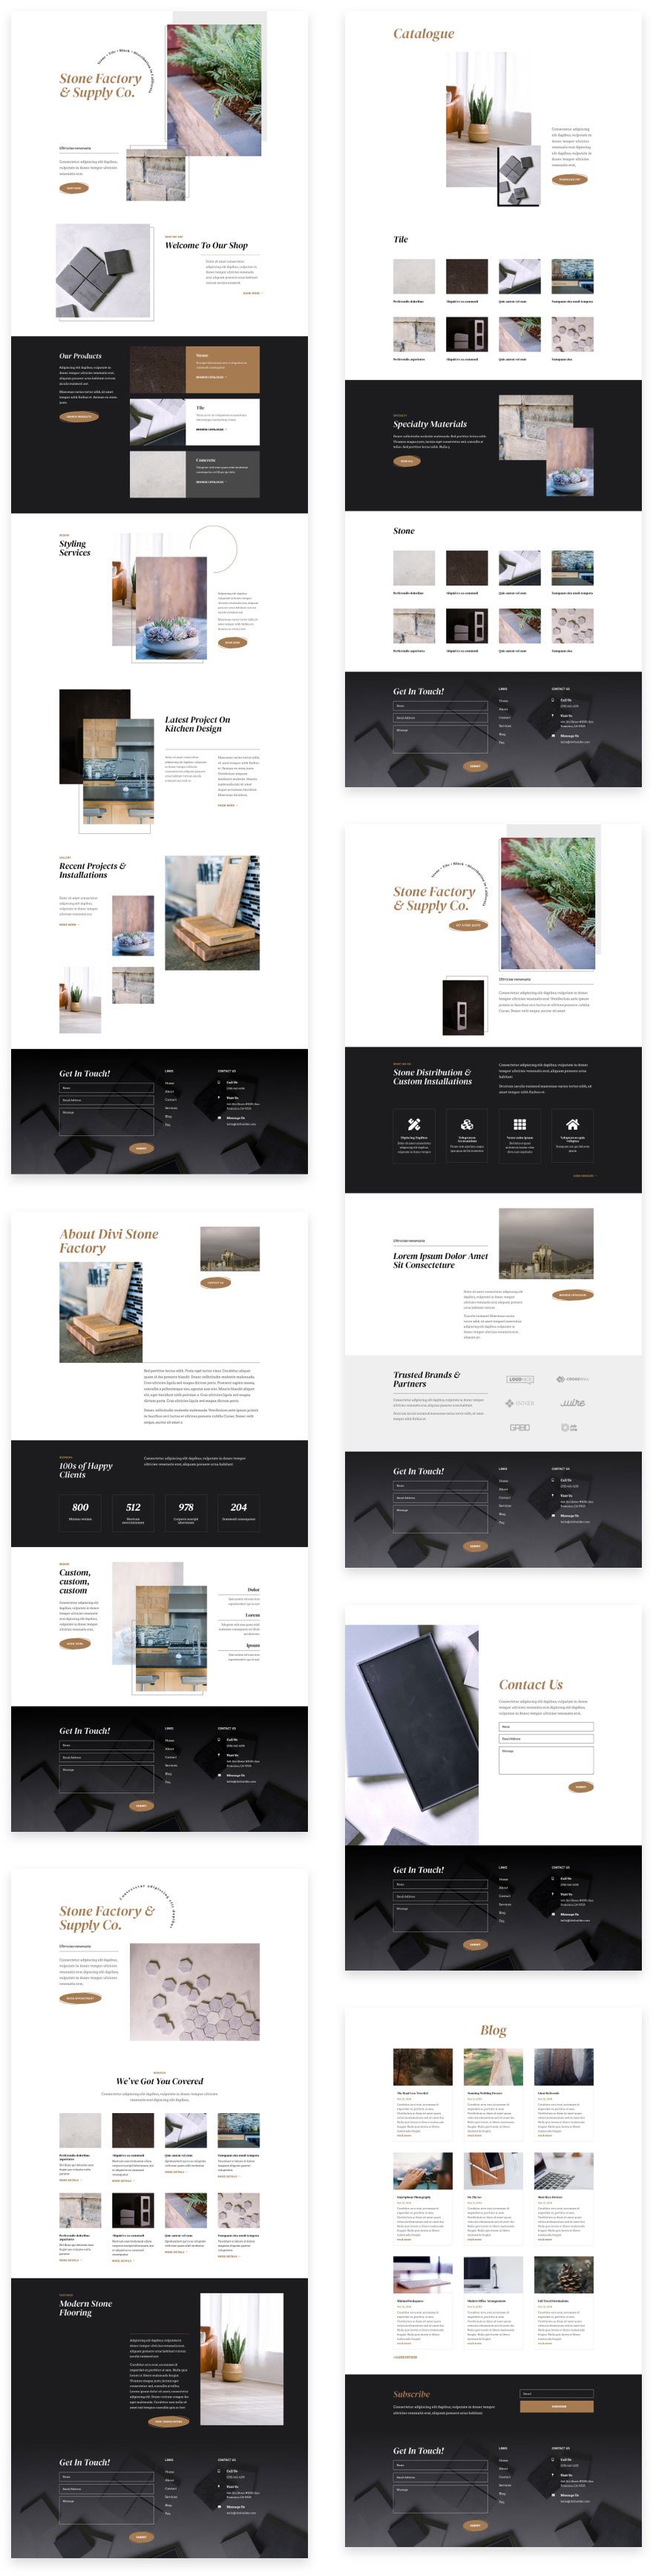 get-a-a-free-stone-factory-layout-pack-for-divi 获得 Divi 的免费 Stone Factory 布局包